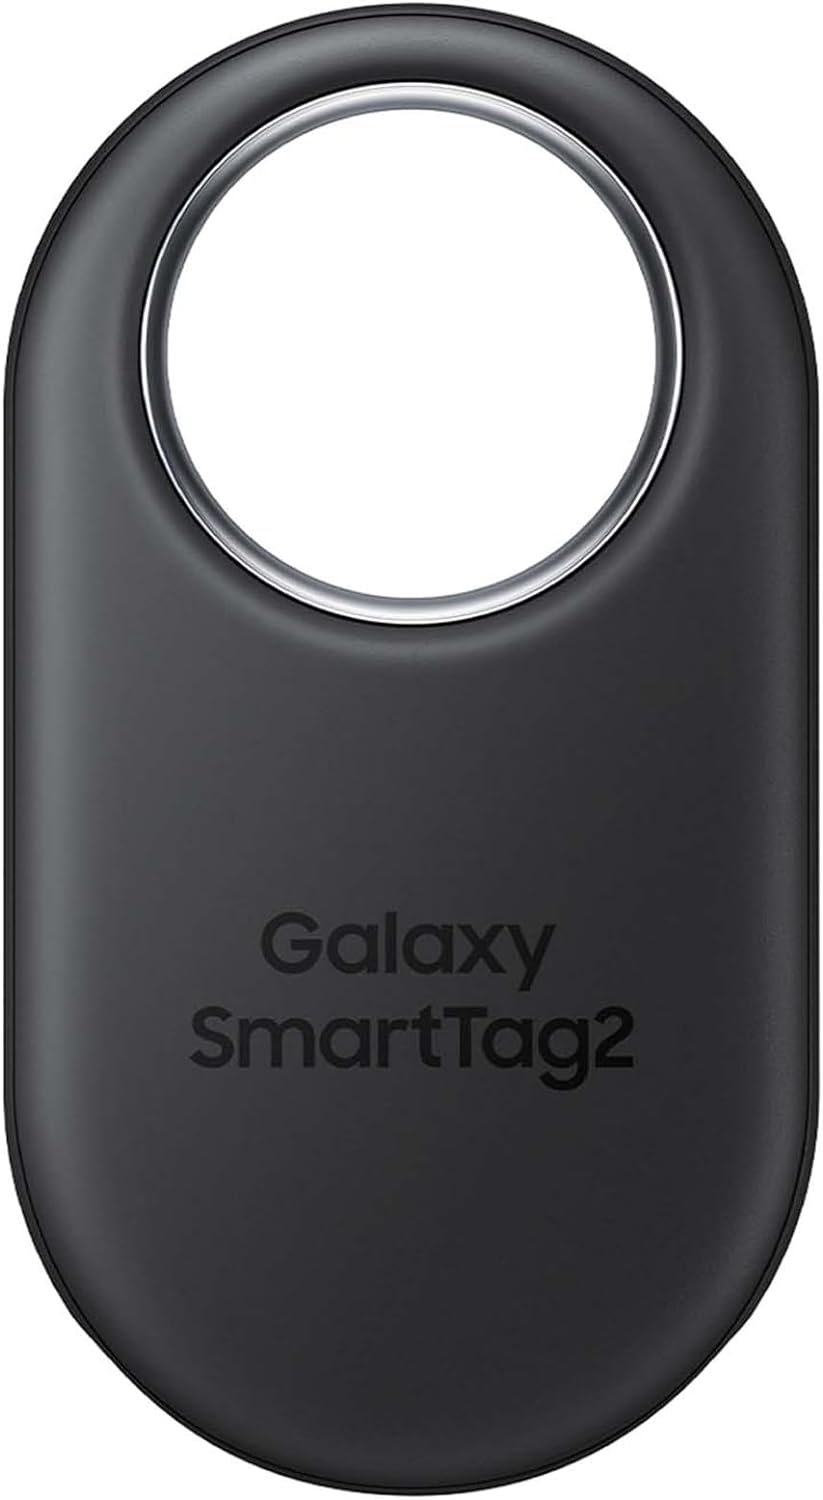 The image shows a Samsung Galaxy SmartTag2, which is a small, oval-shaped, Bluetooth-enabled tracking device. It can be attached to personal items like keys, bags, or even pets, allowing users to locate these items through a smartphone app if they get misplaced. This device helps users find their lost items by signaling their location. The design features a hole at the top for easy attachment to various items, and it has the product name printed on the front.